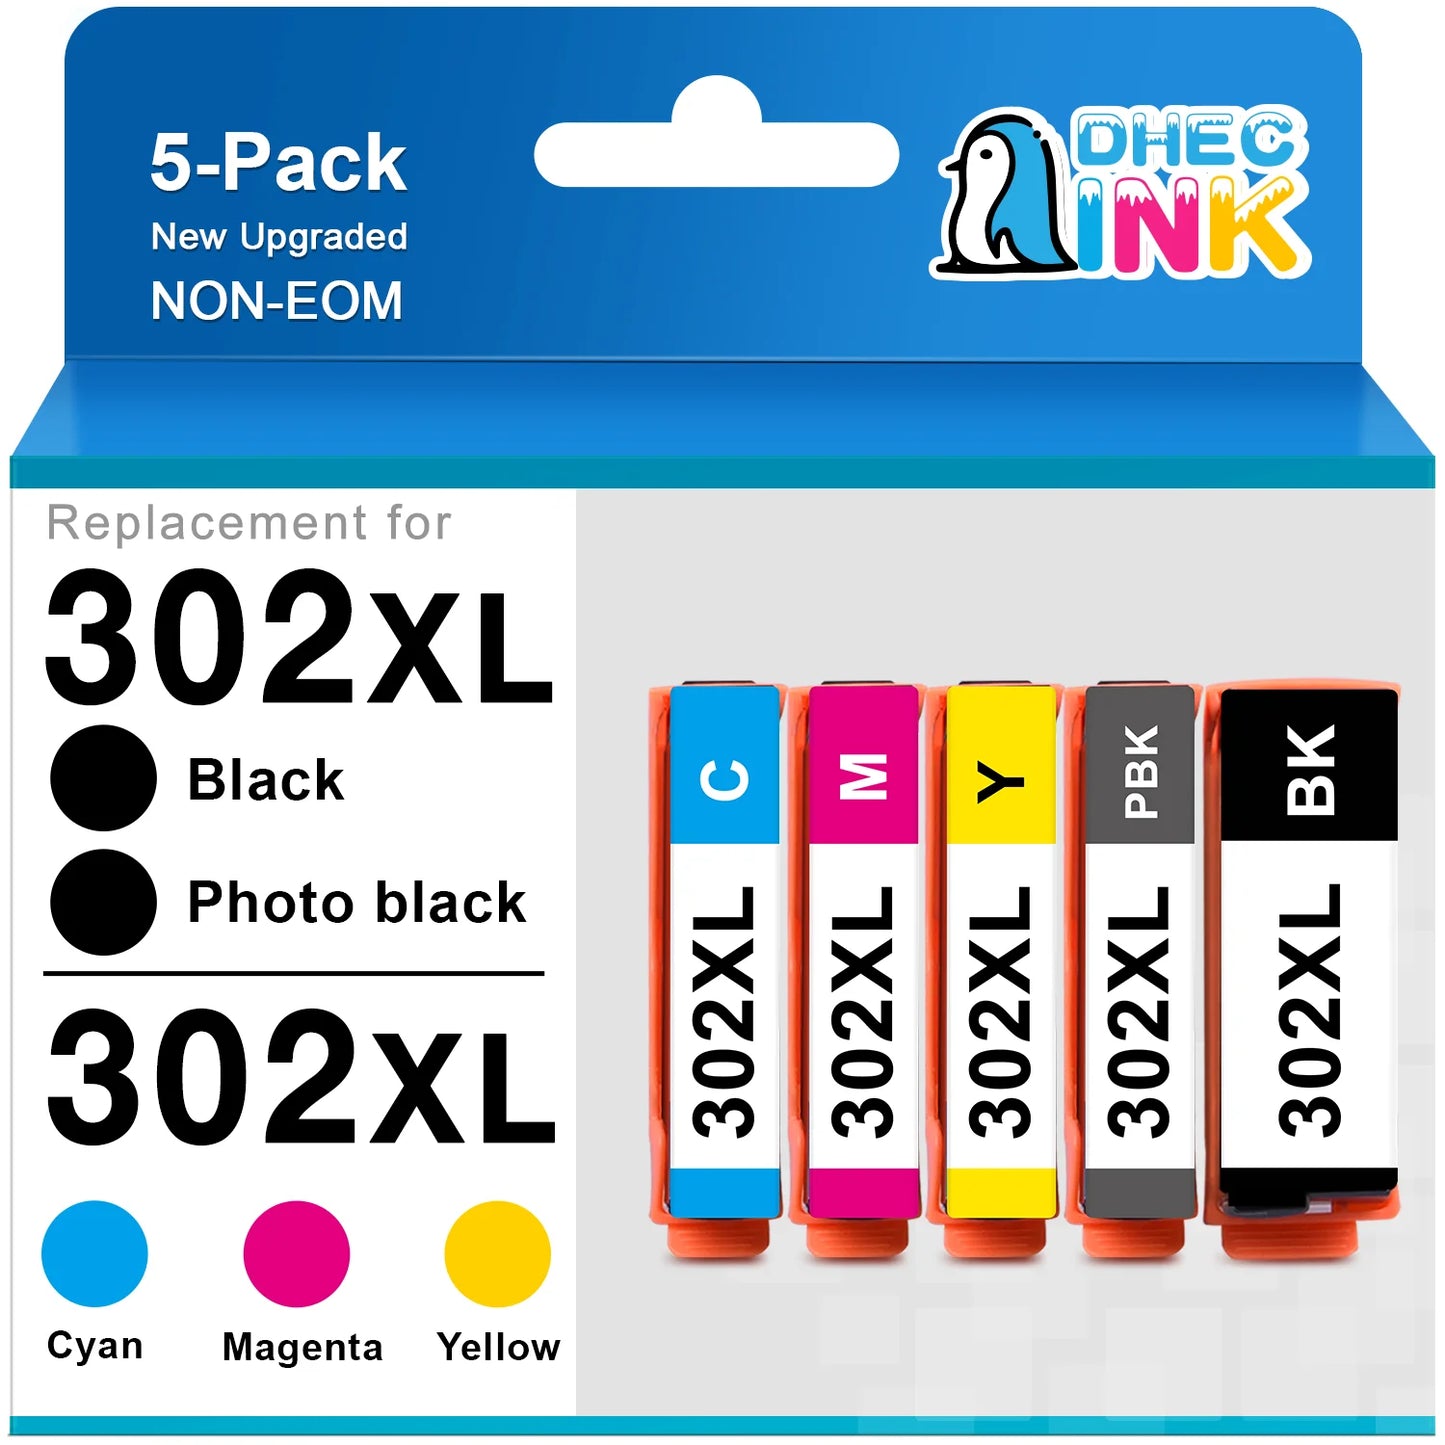 302XL Ink Cartridges for Epson Ink 302XL 302 XL T302 T302XL Multipack for Epson Expression Premium XP-6000 XP-6100 Printer (Black Photo Black Cyan Magenta Yellow, 5-Pack)